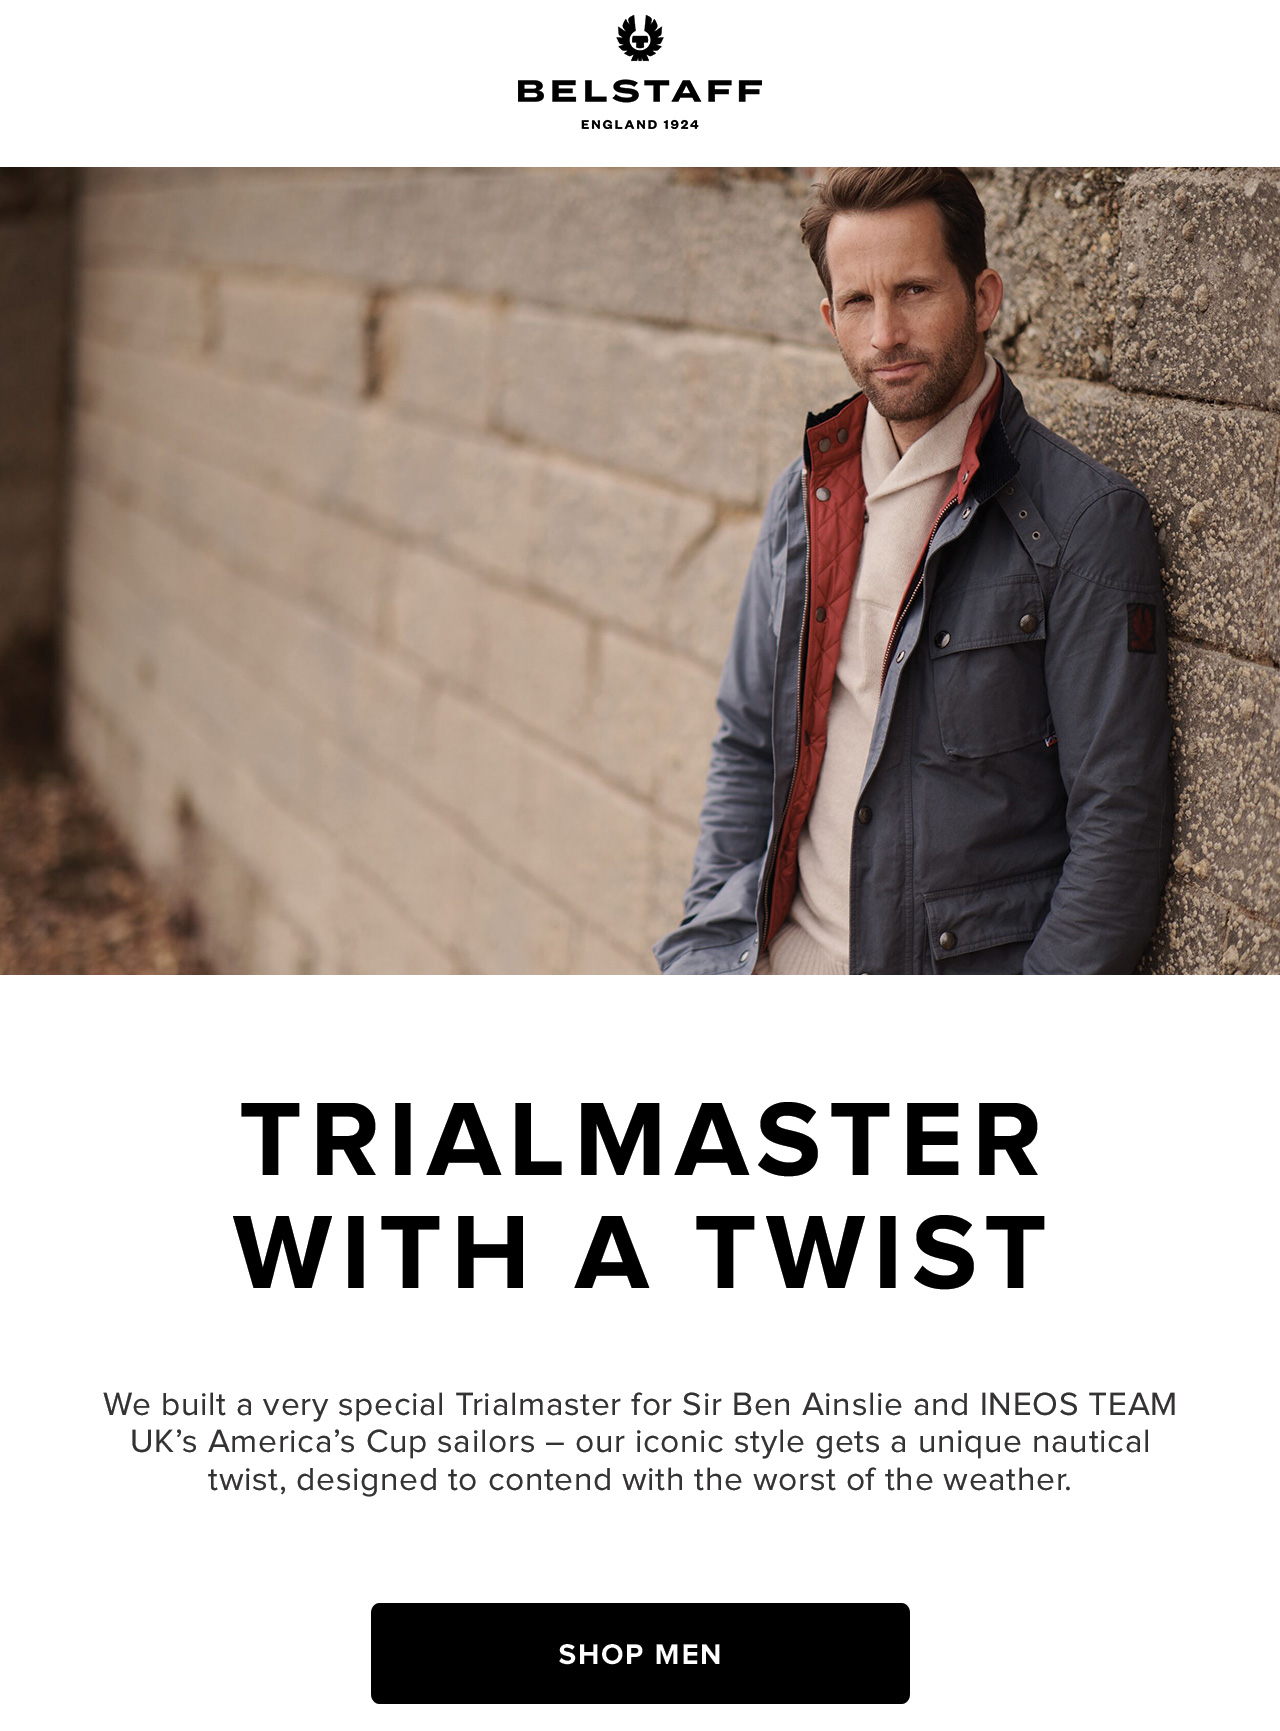 We built a very special Trialmaster for Sir Ben Ainslie and INEOS TEAM UK's America's Cup sailors - our iconic all-weather style gets a unique nautical twist. Click below to find to find out more about a jacket that's cut from a different cloth.